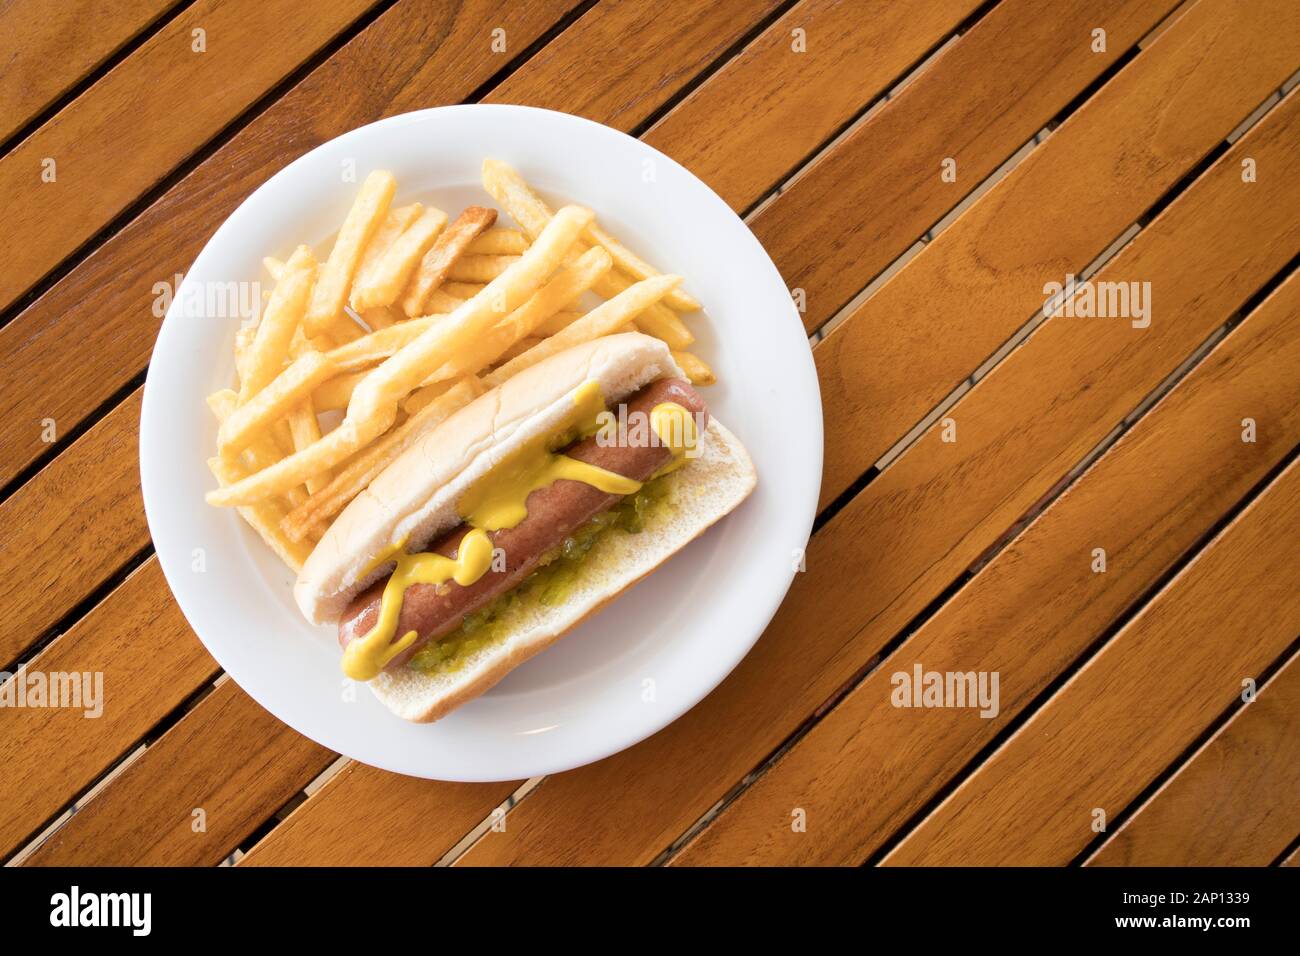 Hot Dog with French Fries Stock Photo